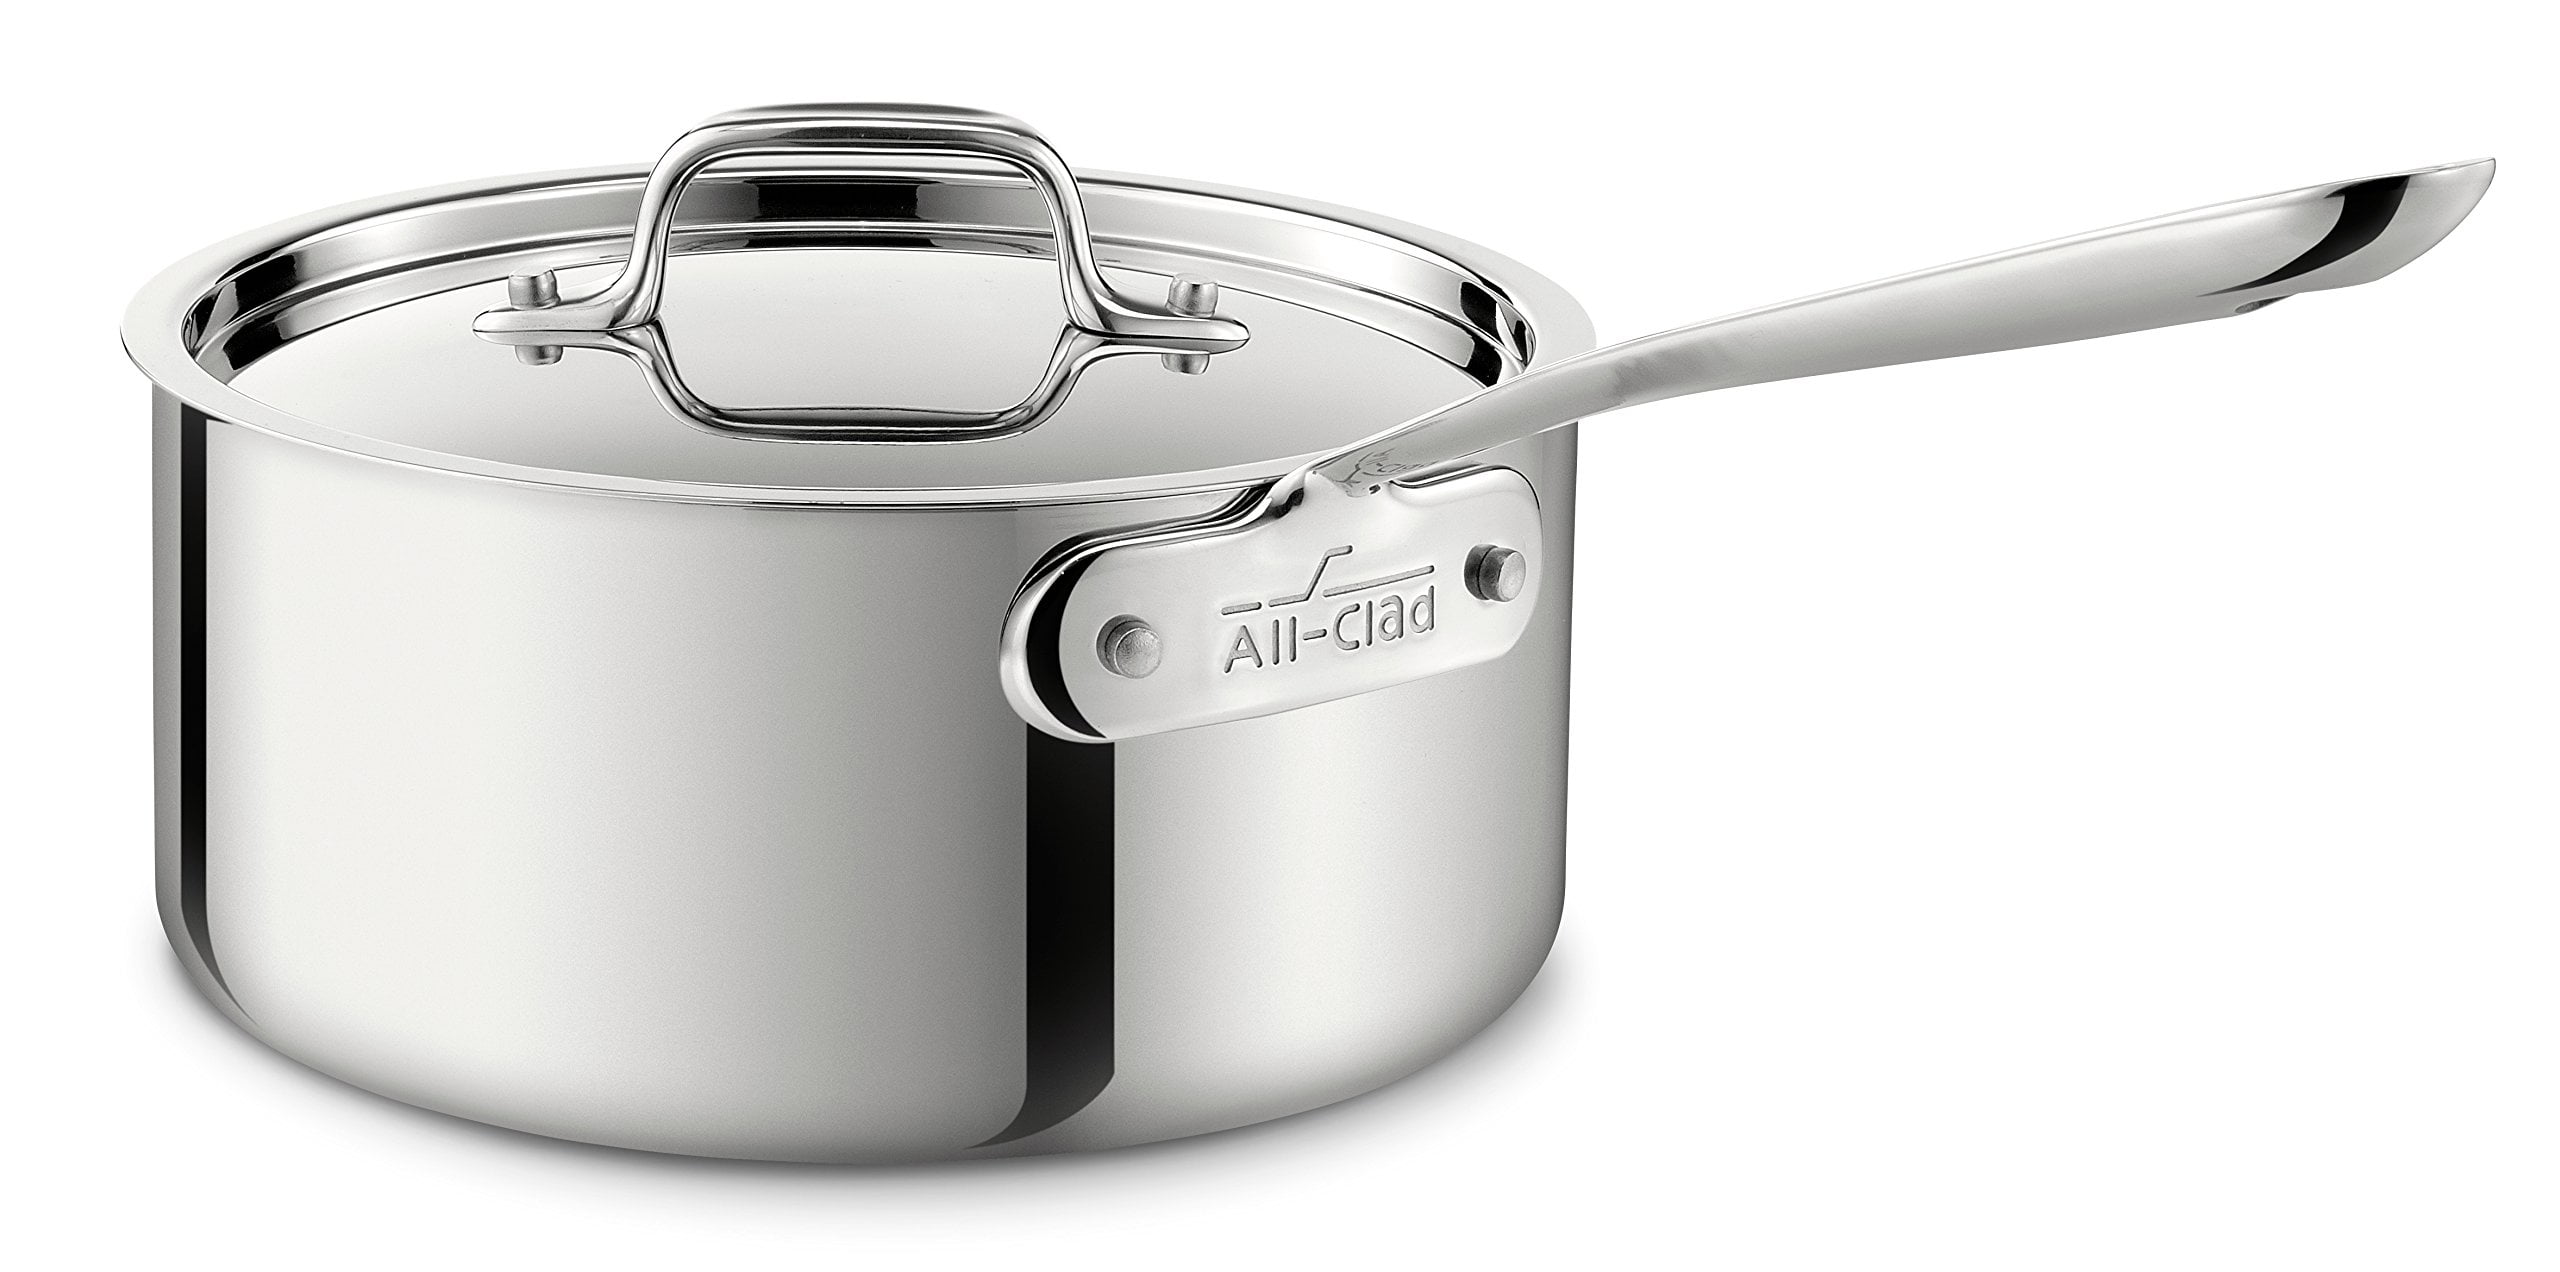 All-Clad 4203 Stainless Steel Tri-Ply Bonded Dishwasher Safe Sauce Pan with  Lid / Cookware, 3-Quart, Silver 